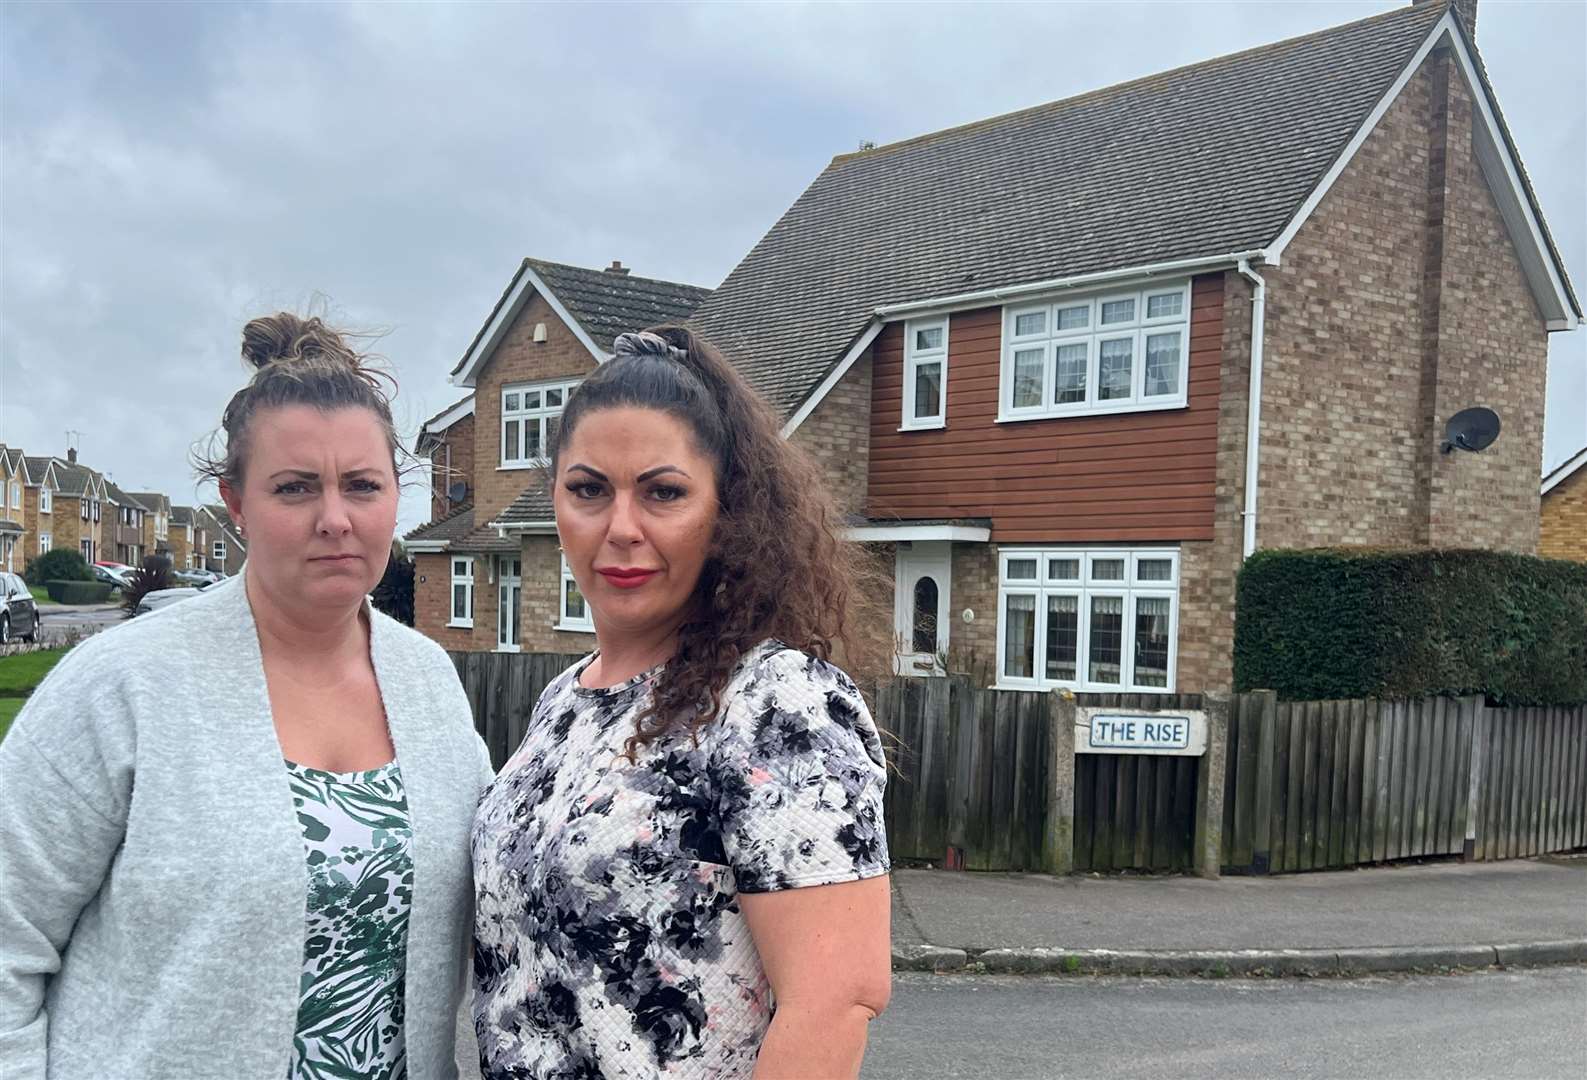 Gemma Wyatt and Selma Mawhinney, residents of Uplands Way on Sheppey